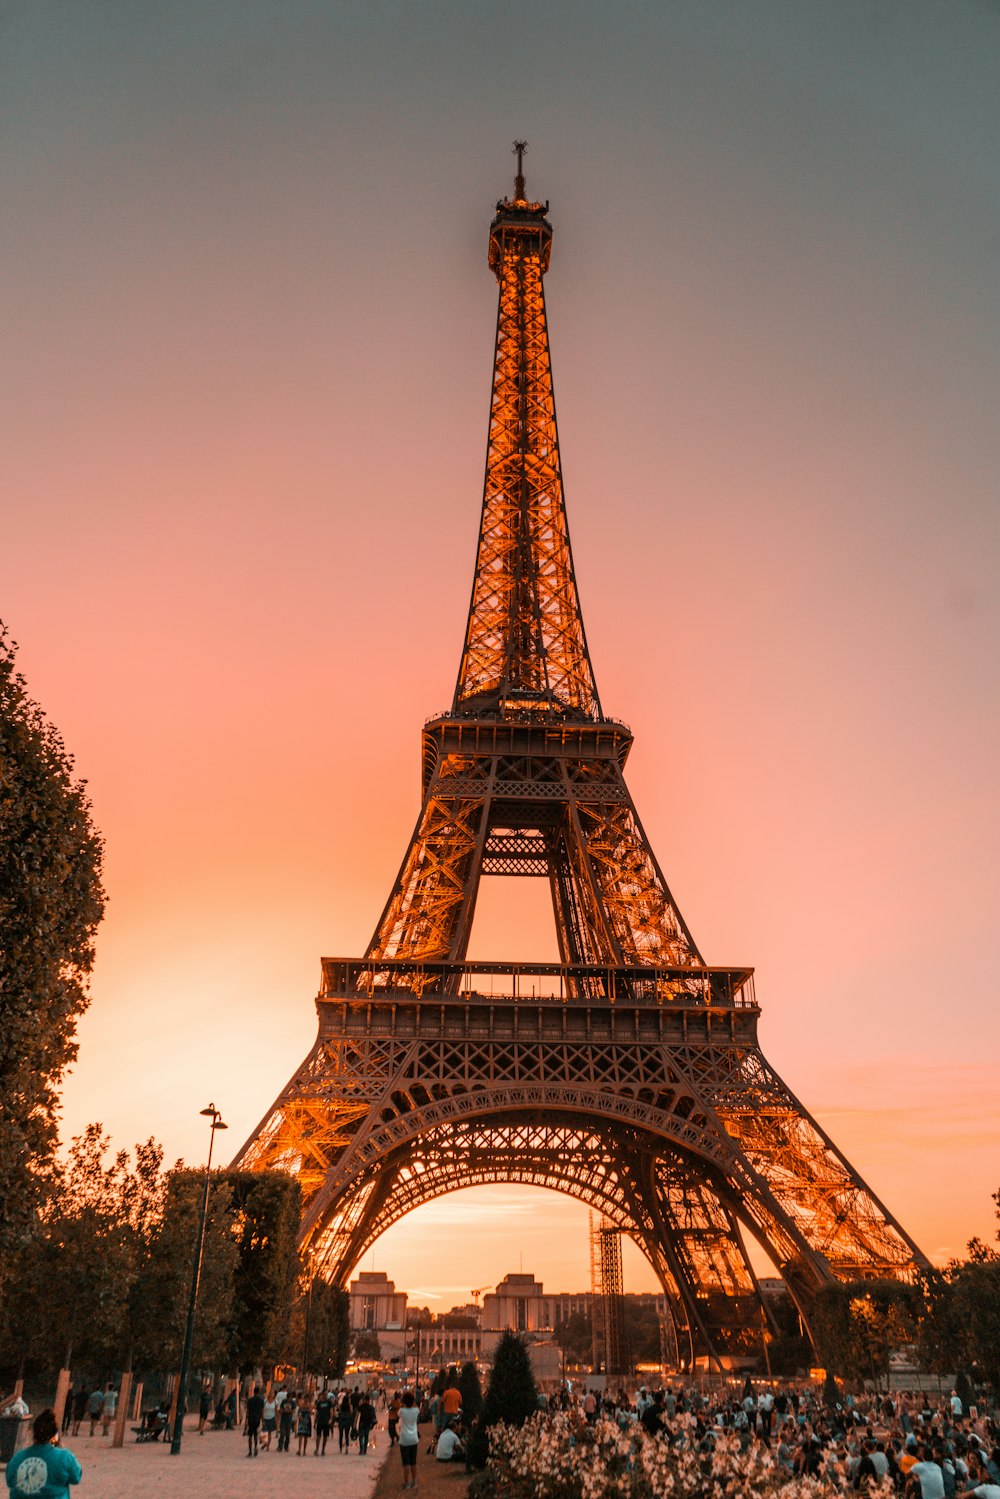 100+ Eiffel-Tower Images - France [HD] | Download Free Images on Unsplash